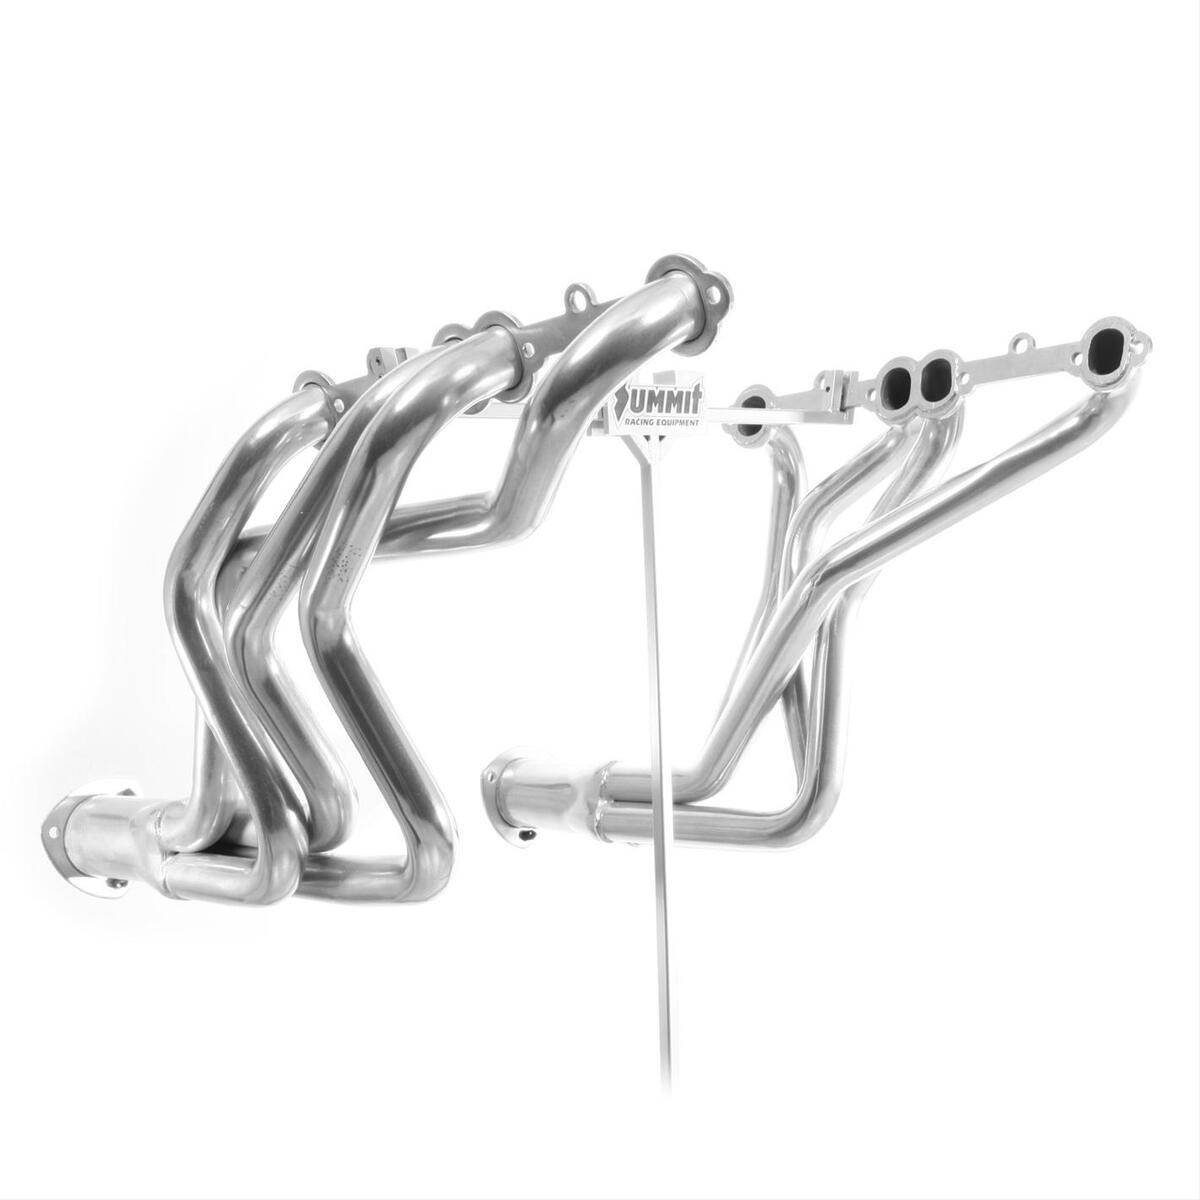 chevy 350 performance headers